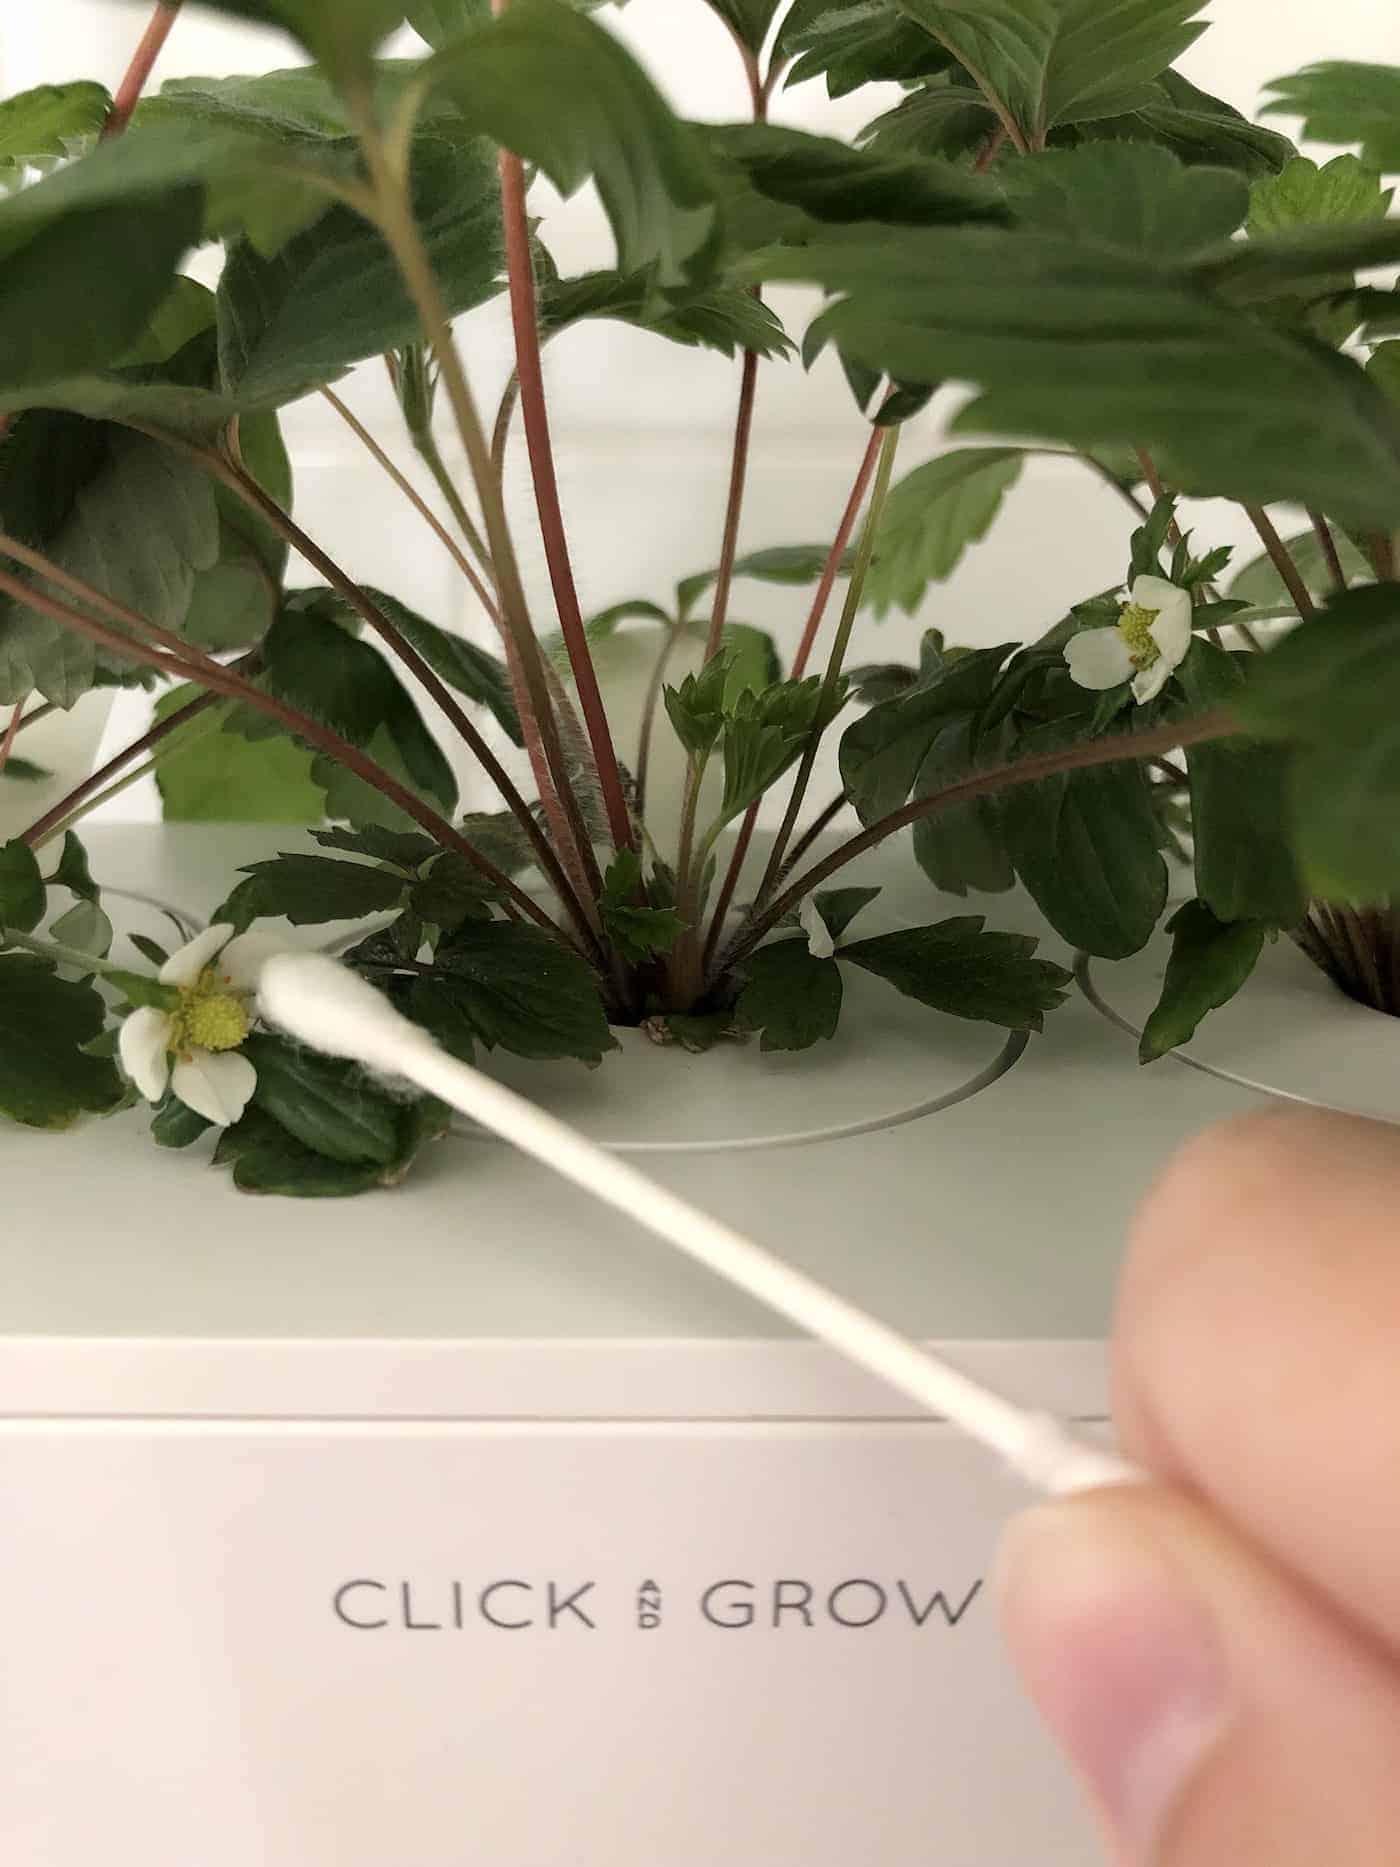 Pollinating strawberry flower with q-tip